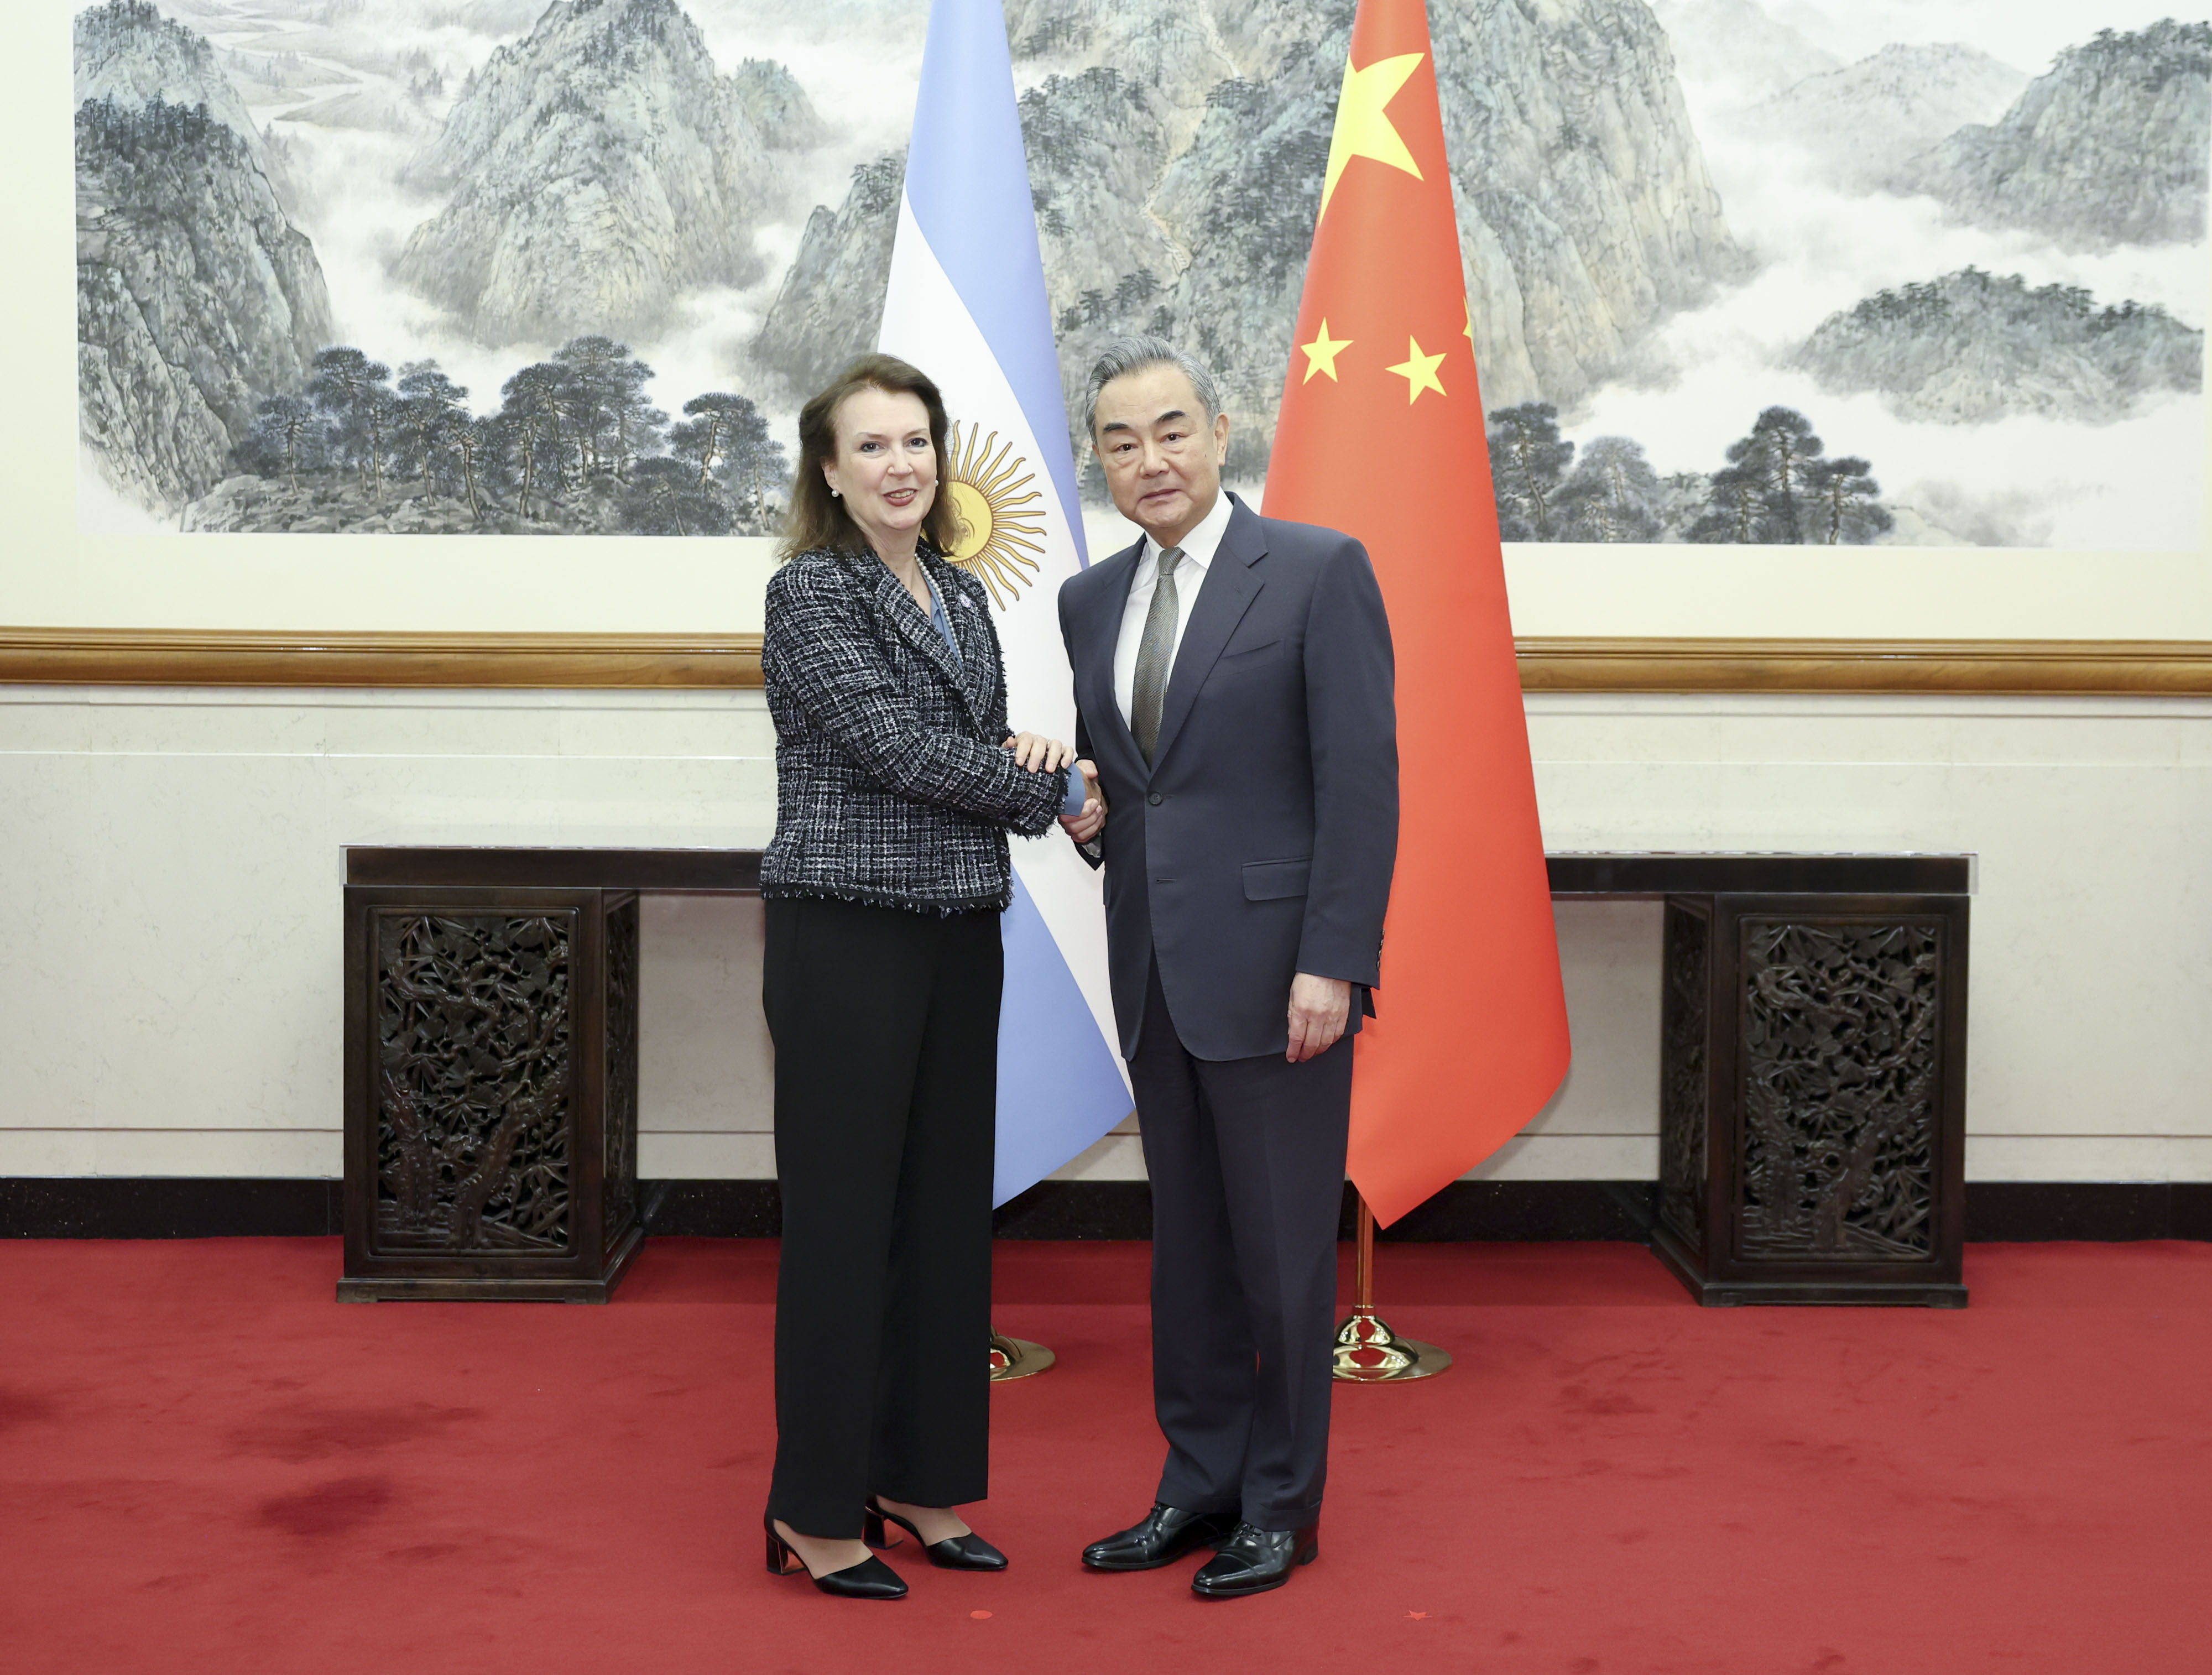 Argentina’s Foreign Minister Diana Mondino meets her Chinese counterpart Wang Yi, in Beijing on April 30. Photo: Xinhua